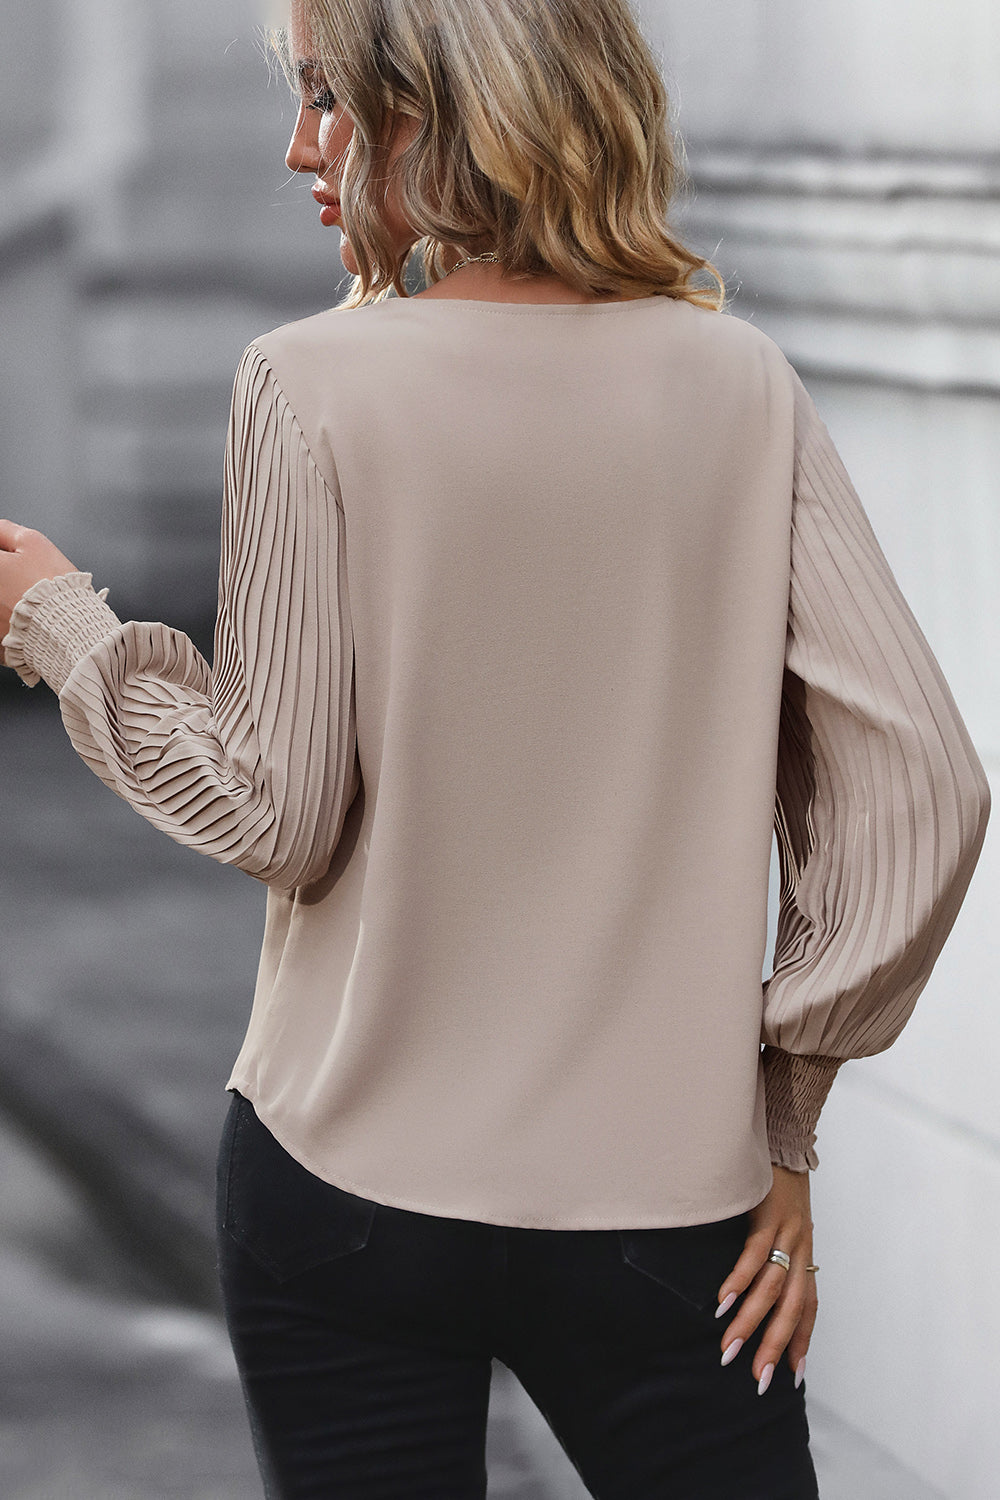 Pleated Lantern Sleeve V-Neck Blouse - Women’s Clothing & Accessories - Shirts & Tops - 2 - 2024